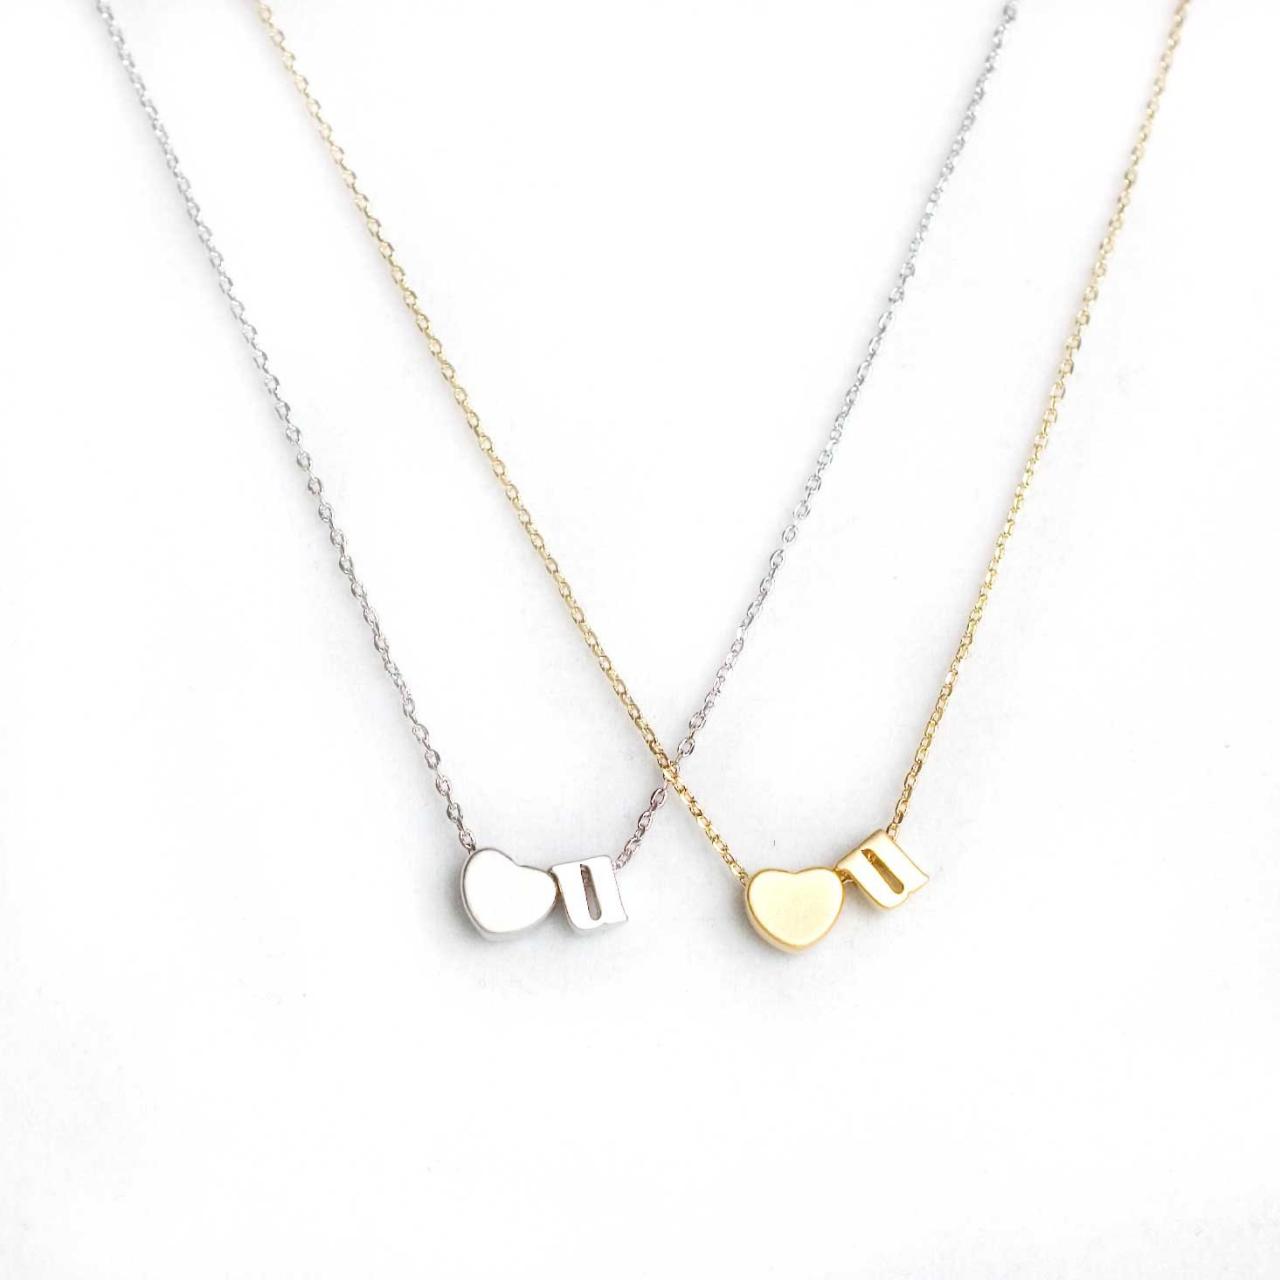 Luv U Love You Tiny Silver Lowercase Letter Necklace on Luulla